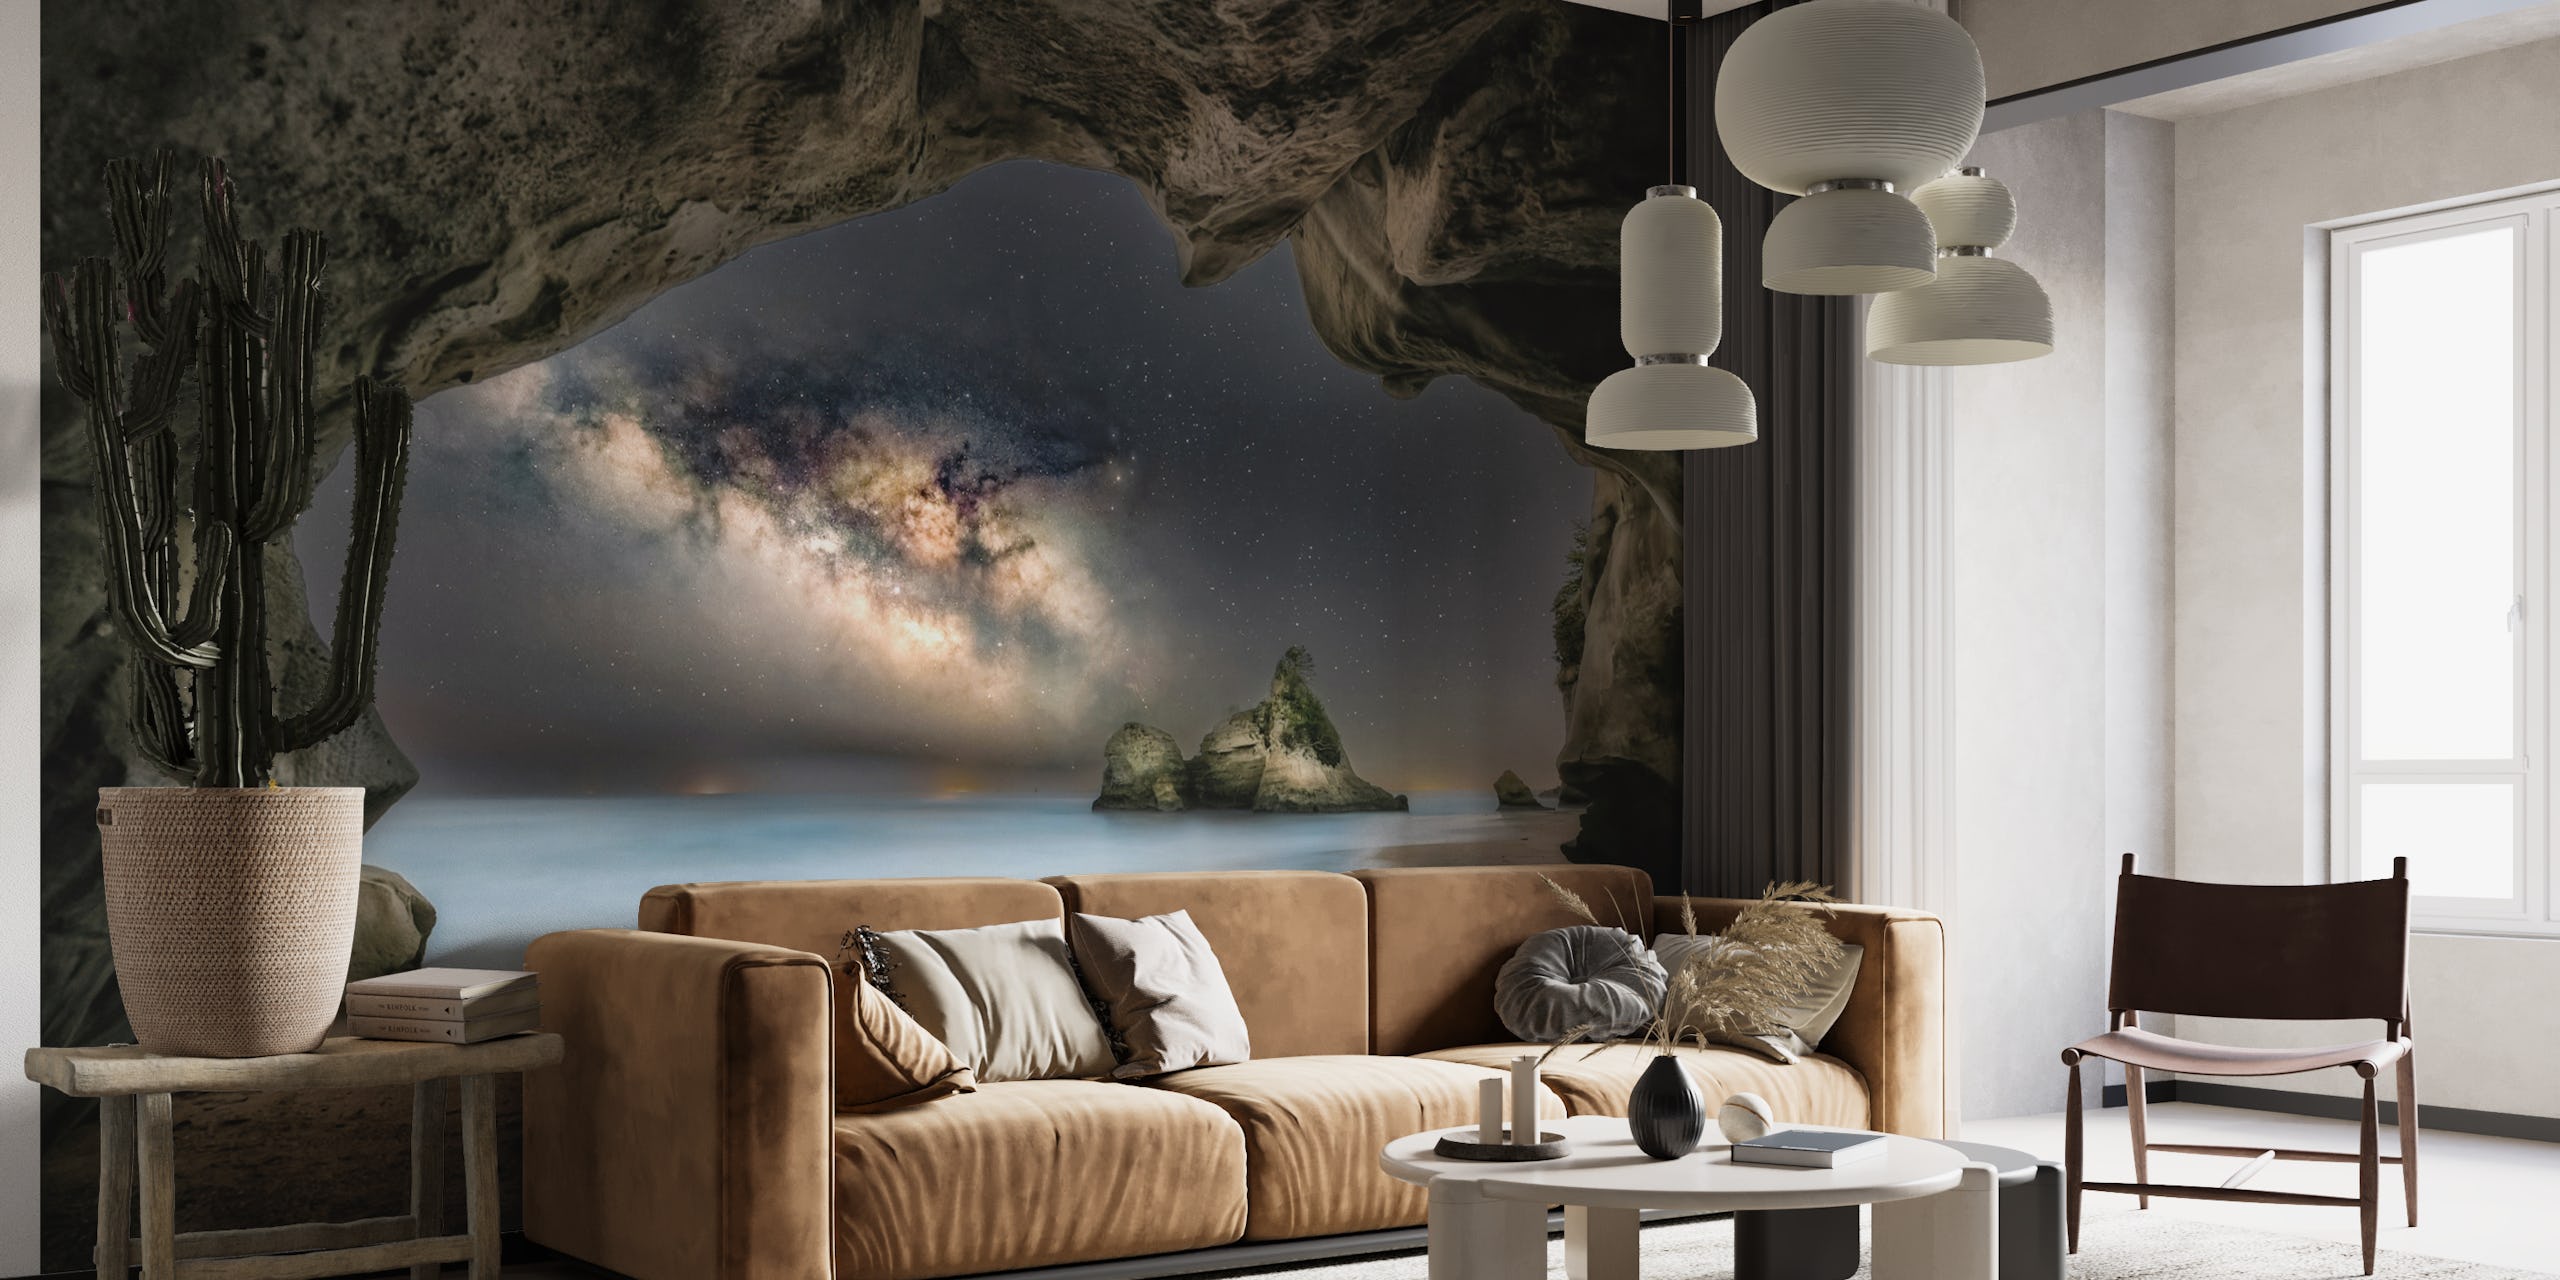 In the cave with starry sky wallpaper